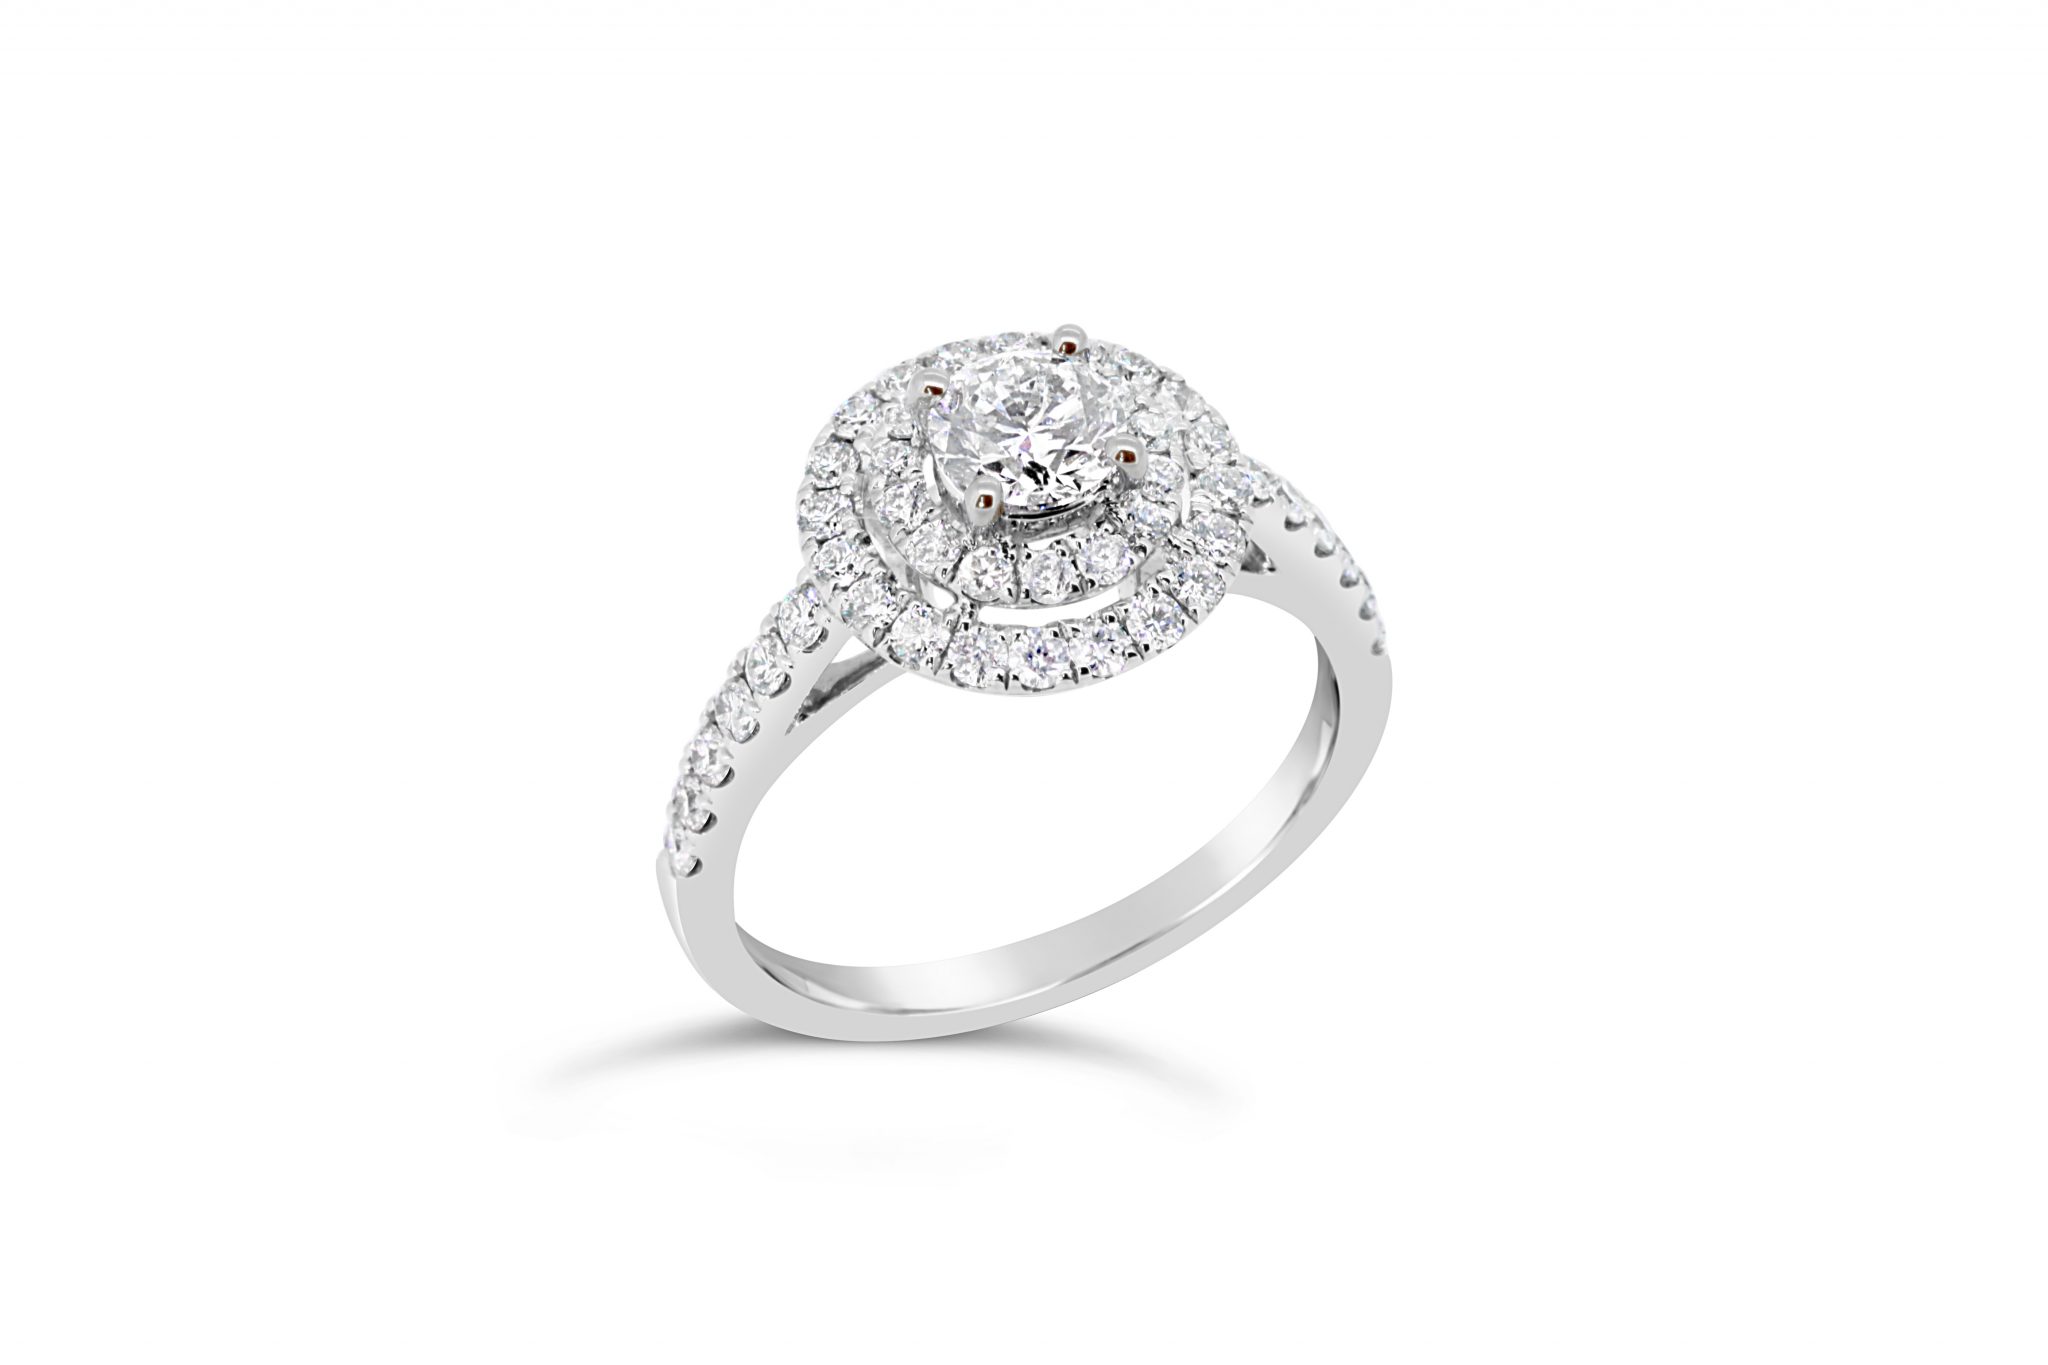 White Gold Double Halo Engagement Ring | Gold River Jewellers